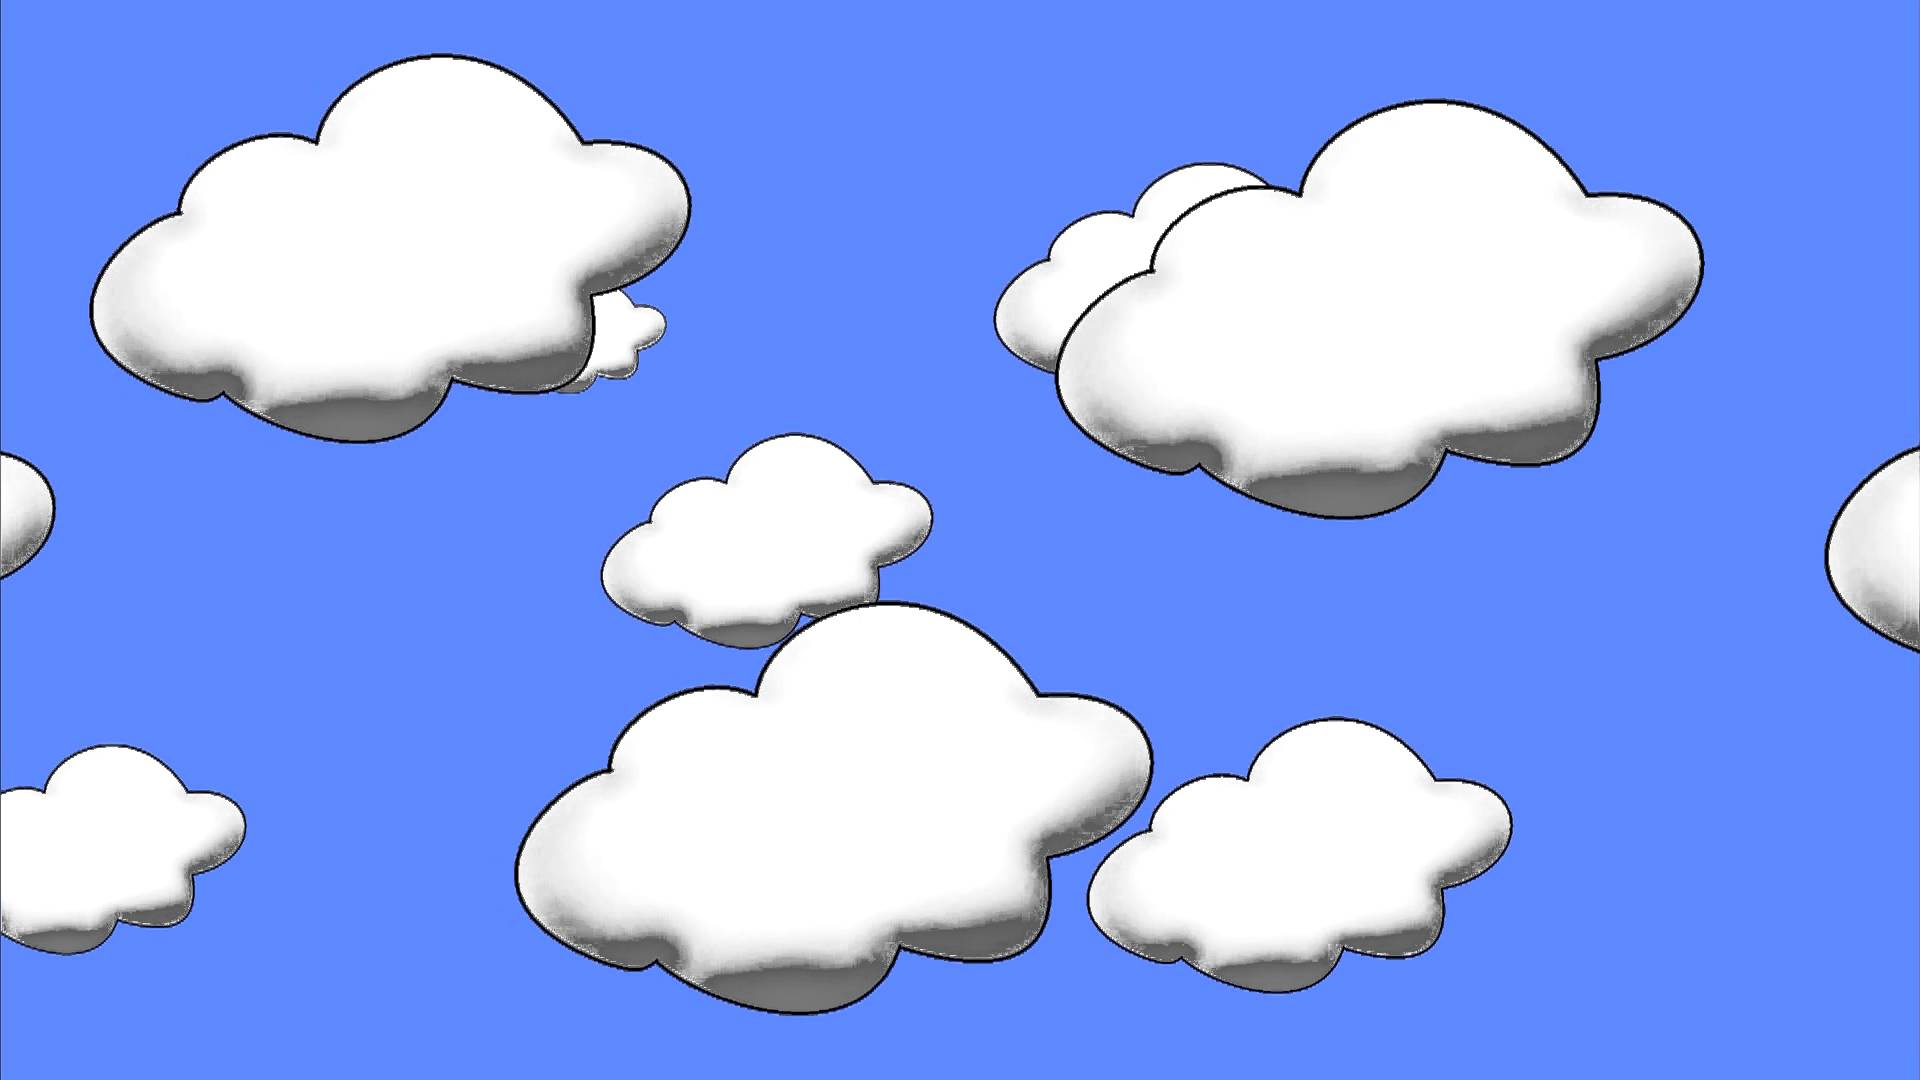 Cloud Cartoon : Thinking cartoon clouds (balloons) info motion graphic animation ( royalty free